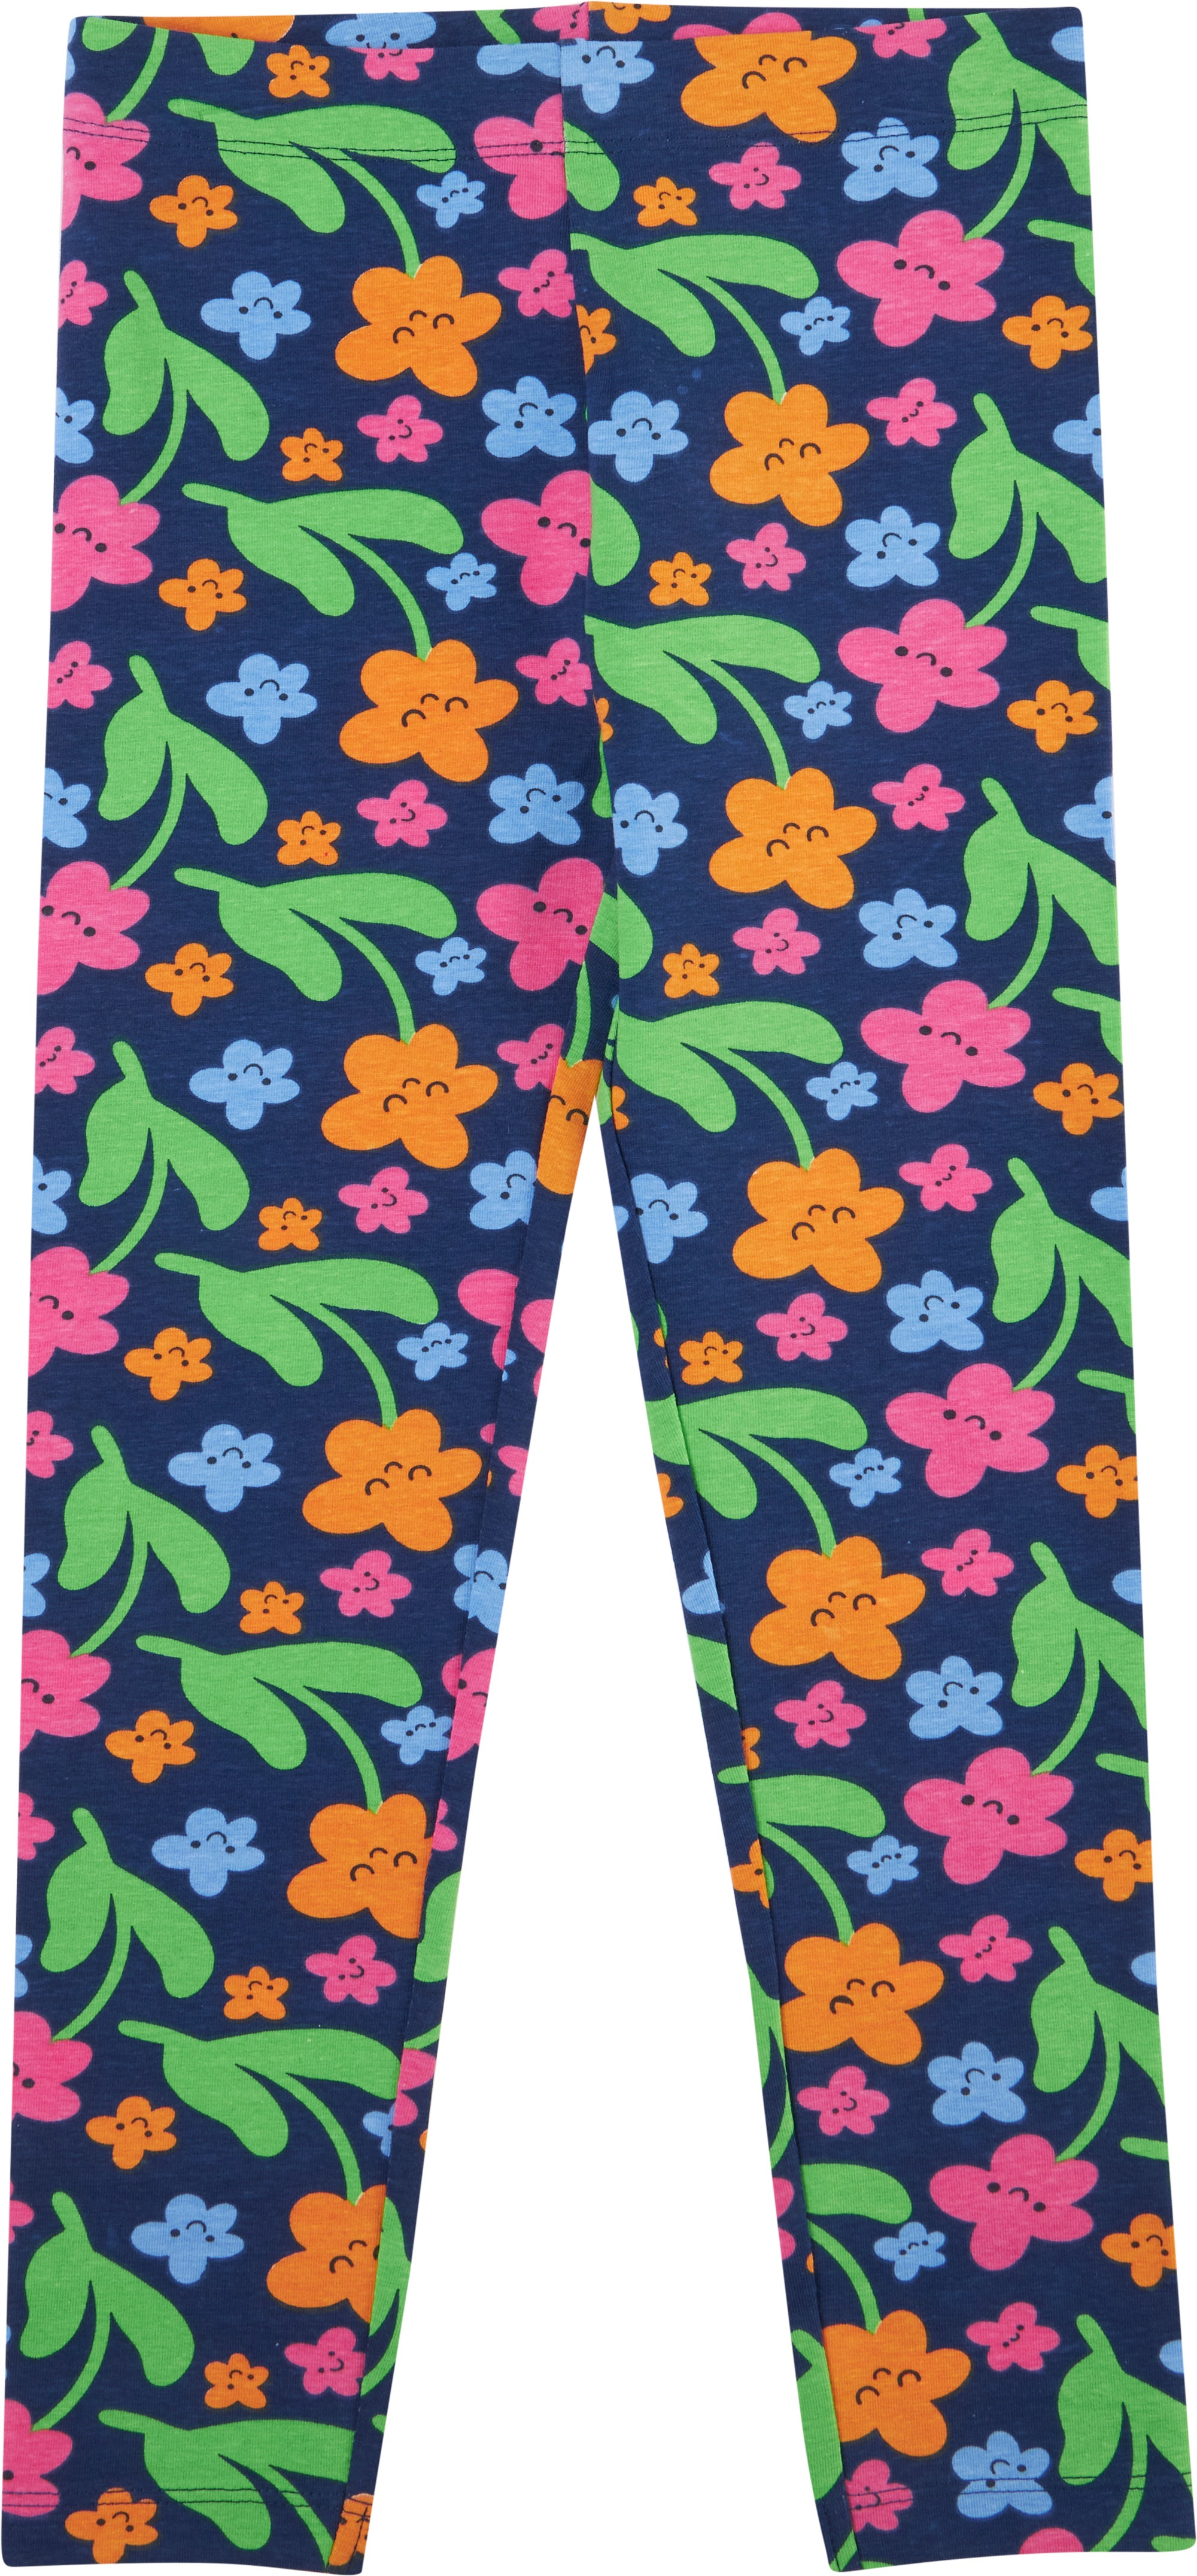 https://www.postie.co.nz/content/products/little-kids-full-length-printed-leggings-happy-floral-a-outfit-819560.jpg